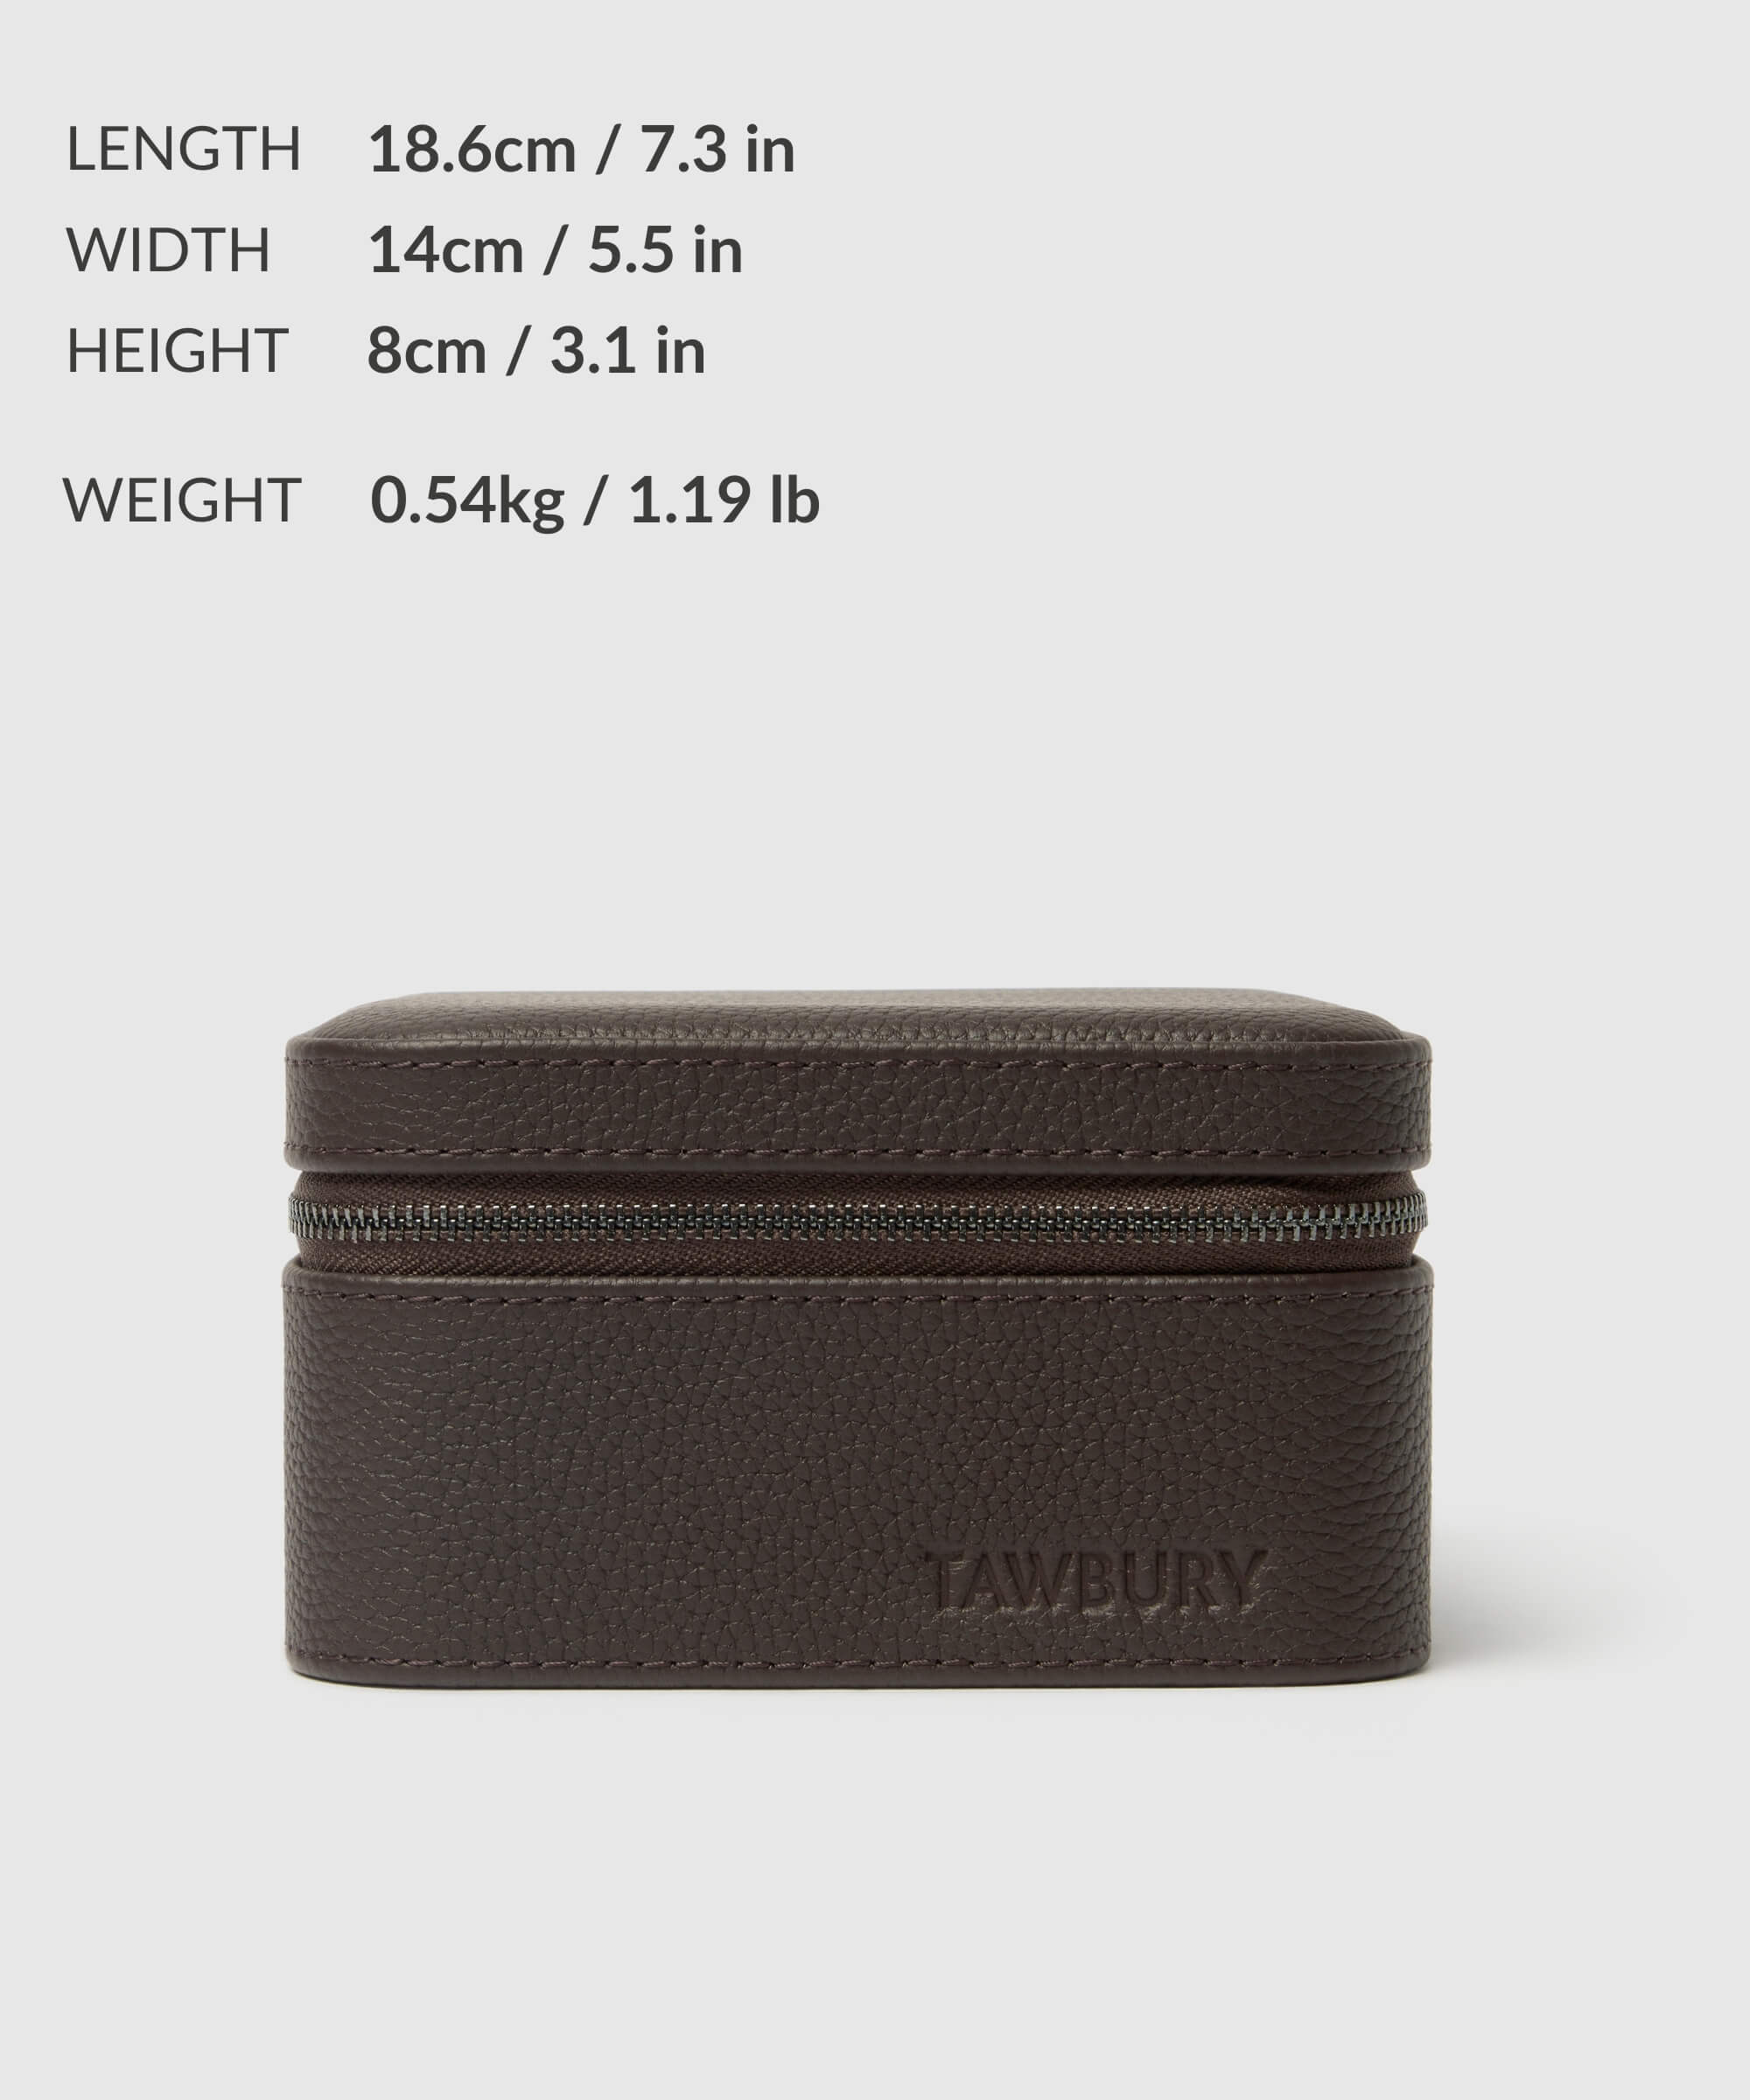 A dark brown, rectangular leather watch case with a zippered closure is displayed. Part of the Fraser Collection, its dimensions and weight are listed to the left: 18.6x14x8 cm (7.3x5.5x3.1 in), 0.54 kg (1.19 lb). "TAWBURY" is embossed on the front, ensuring quality watch protection for your Fraser 4 Watch Travel Case - Brown (Coming Soon).